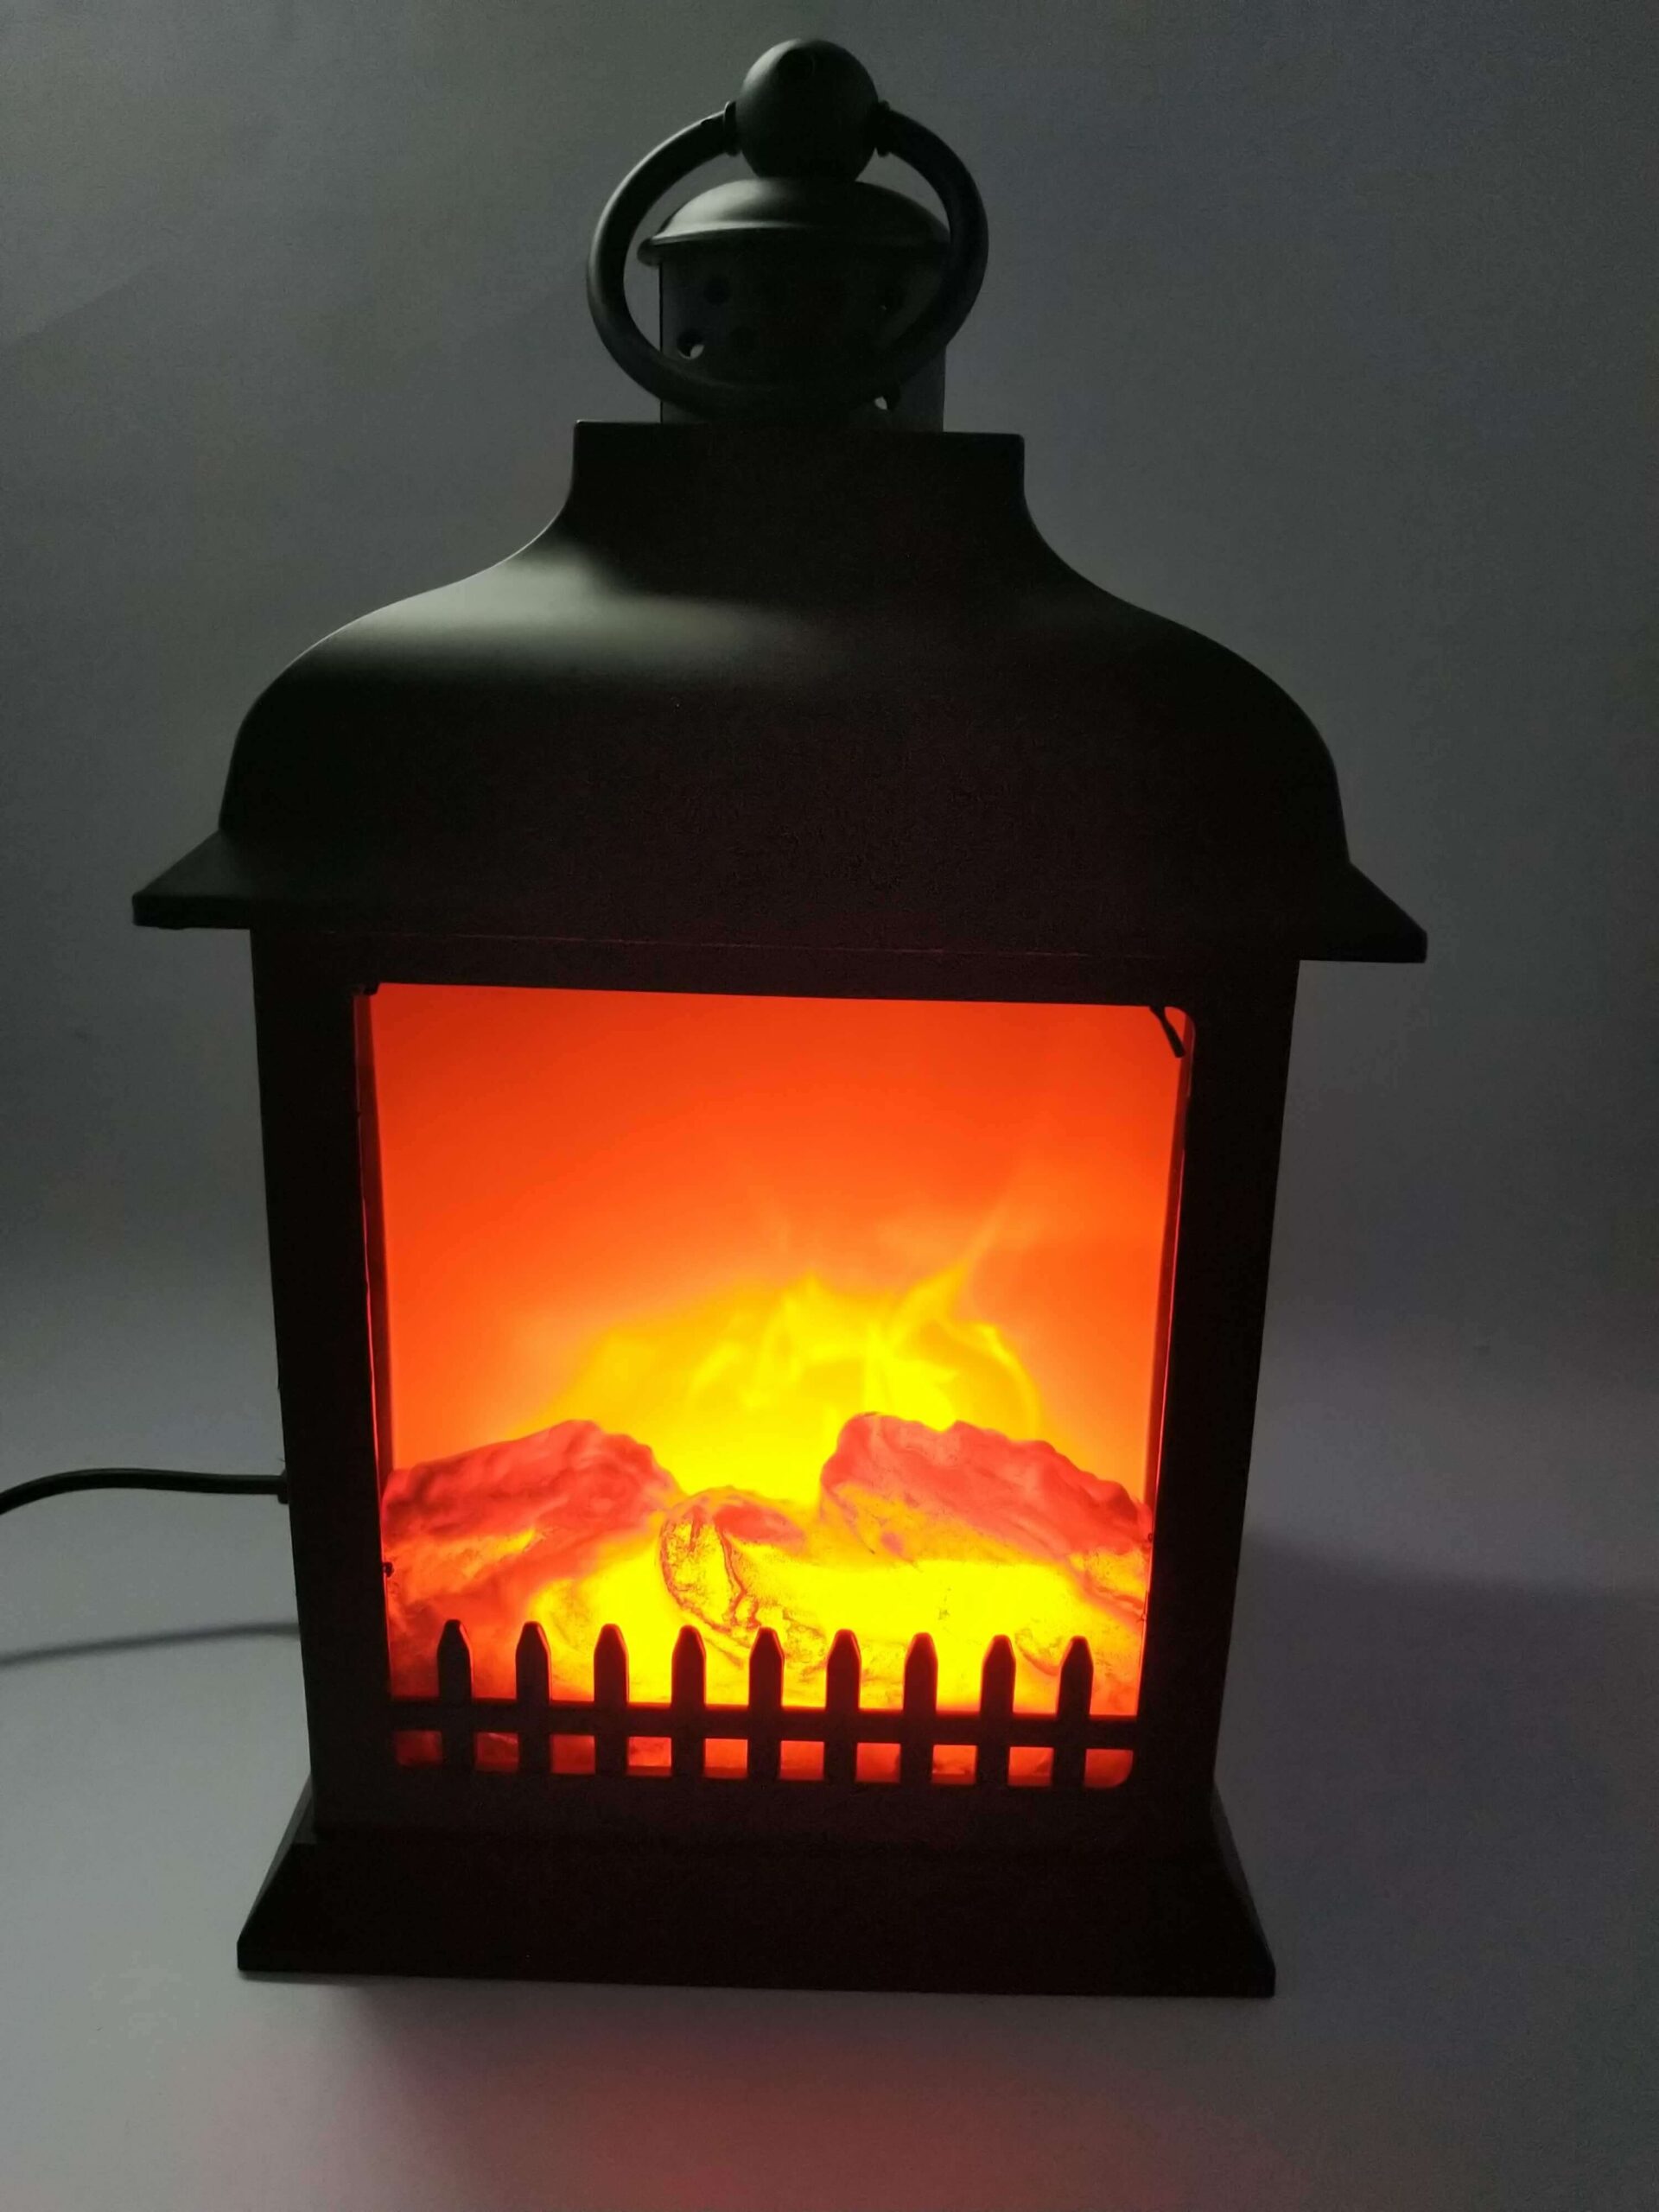 Portable Indoor Fireplace Awesome Artificial Led Fireplace with Realistic Log Wood Burning Flame Simulation Effect Usb Operated Portable Tabletop Fire Light Multicolour